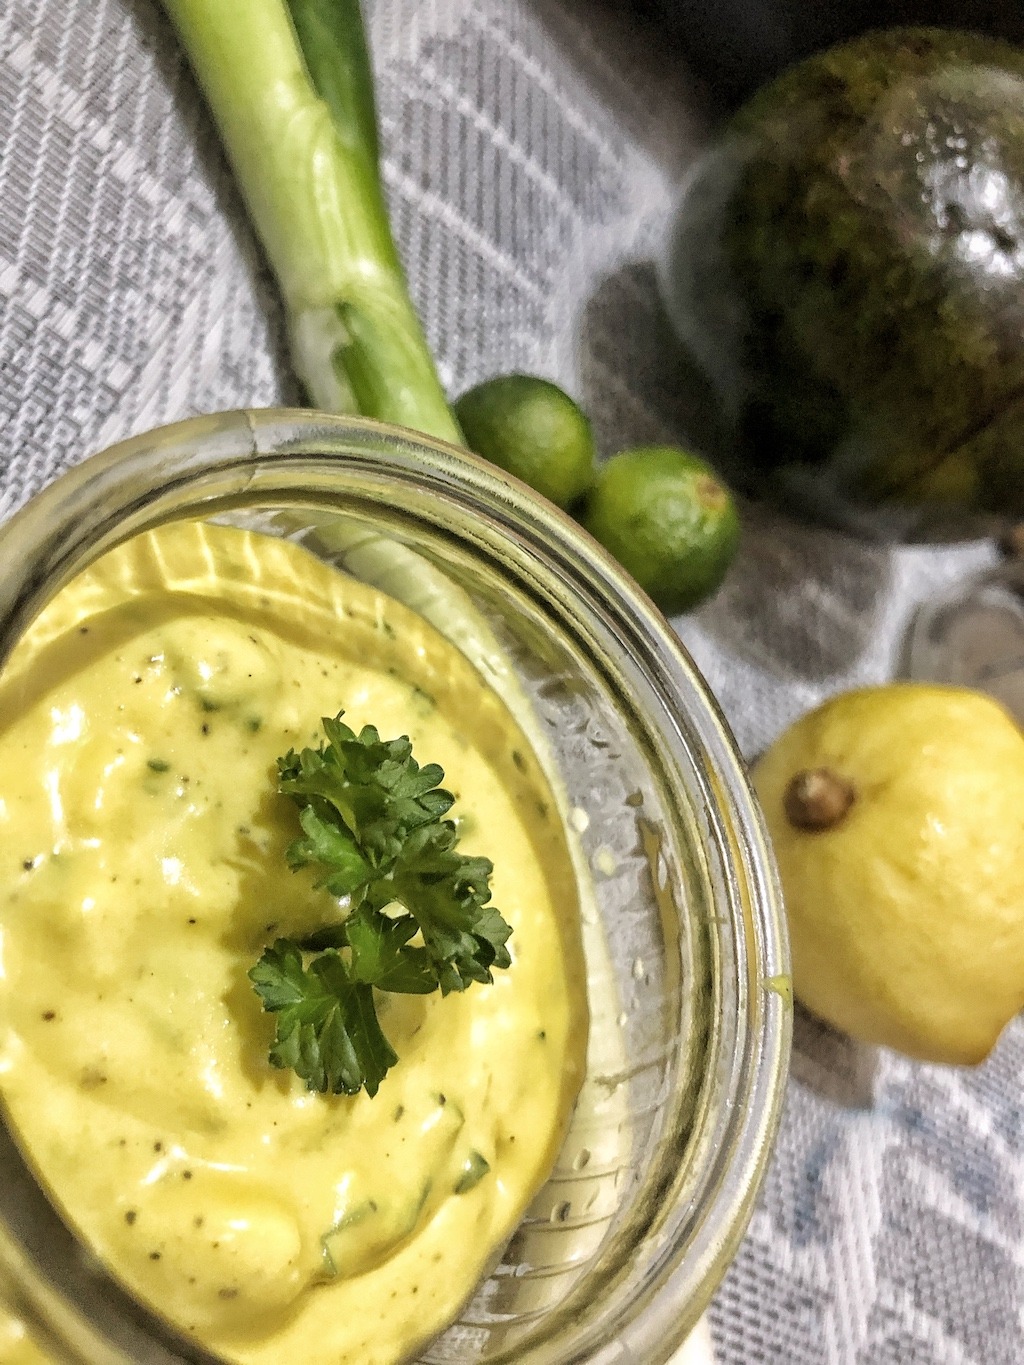 Recipe Easy Creamy Mustard BBQ Sauce For Fish Beef Or Chicken - Healthy Keto Sugar Free Low Carb